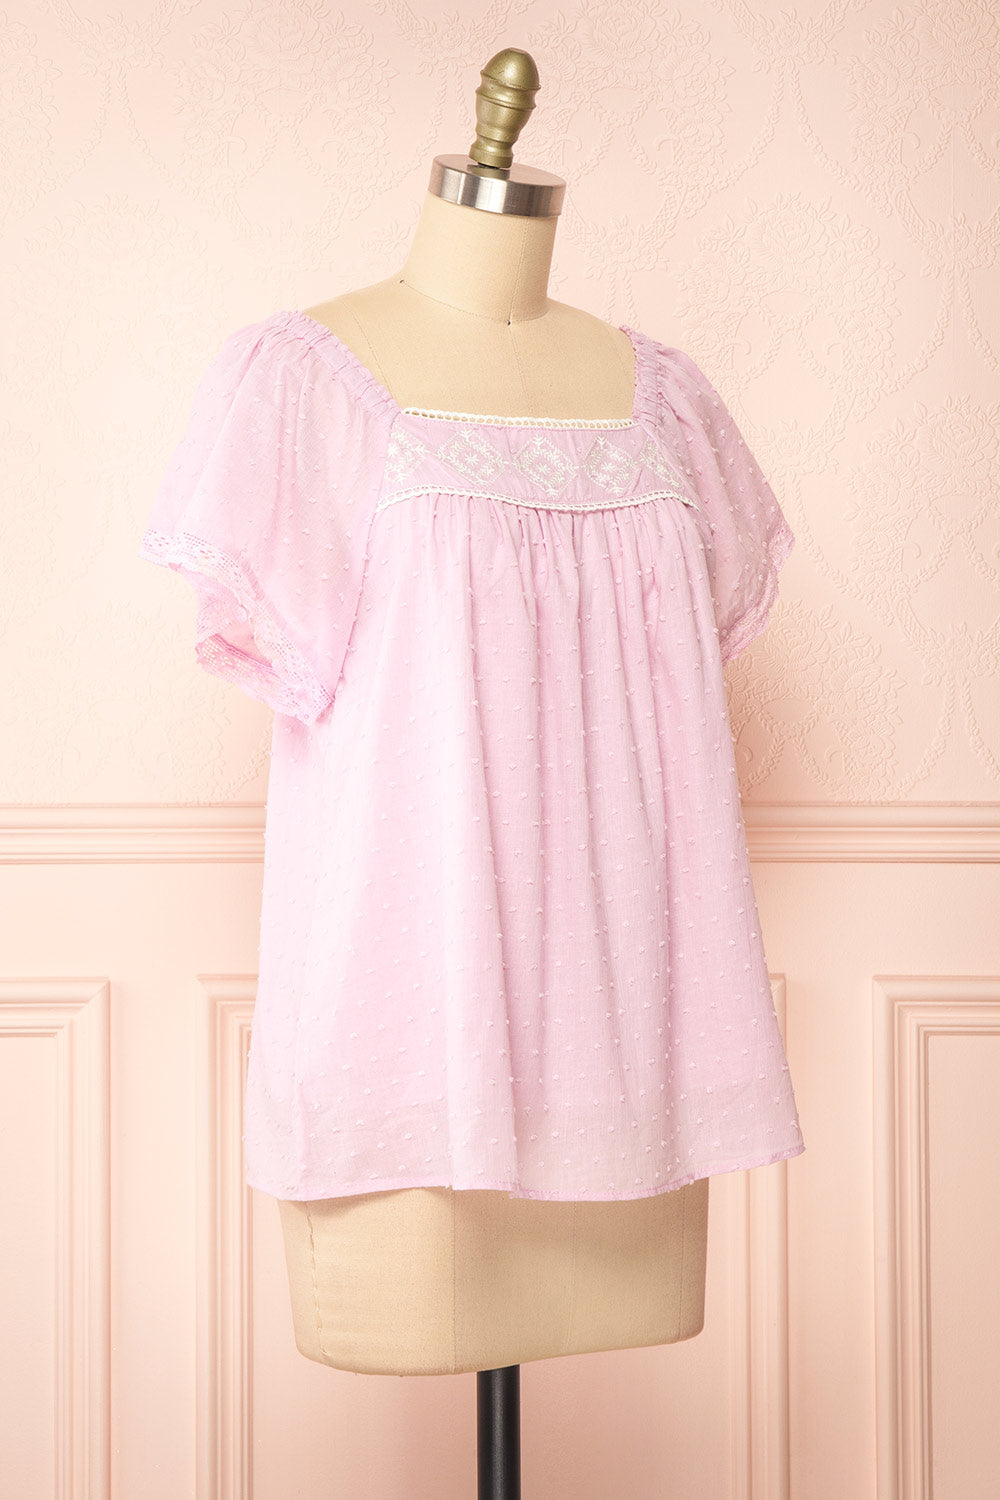 Khalesy Pink Short Sleeve Top w/ Embroidery | Boutique 1861 side view